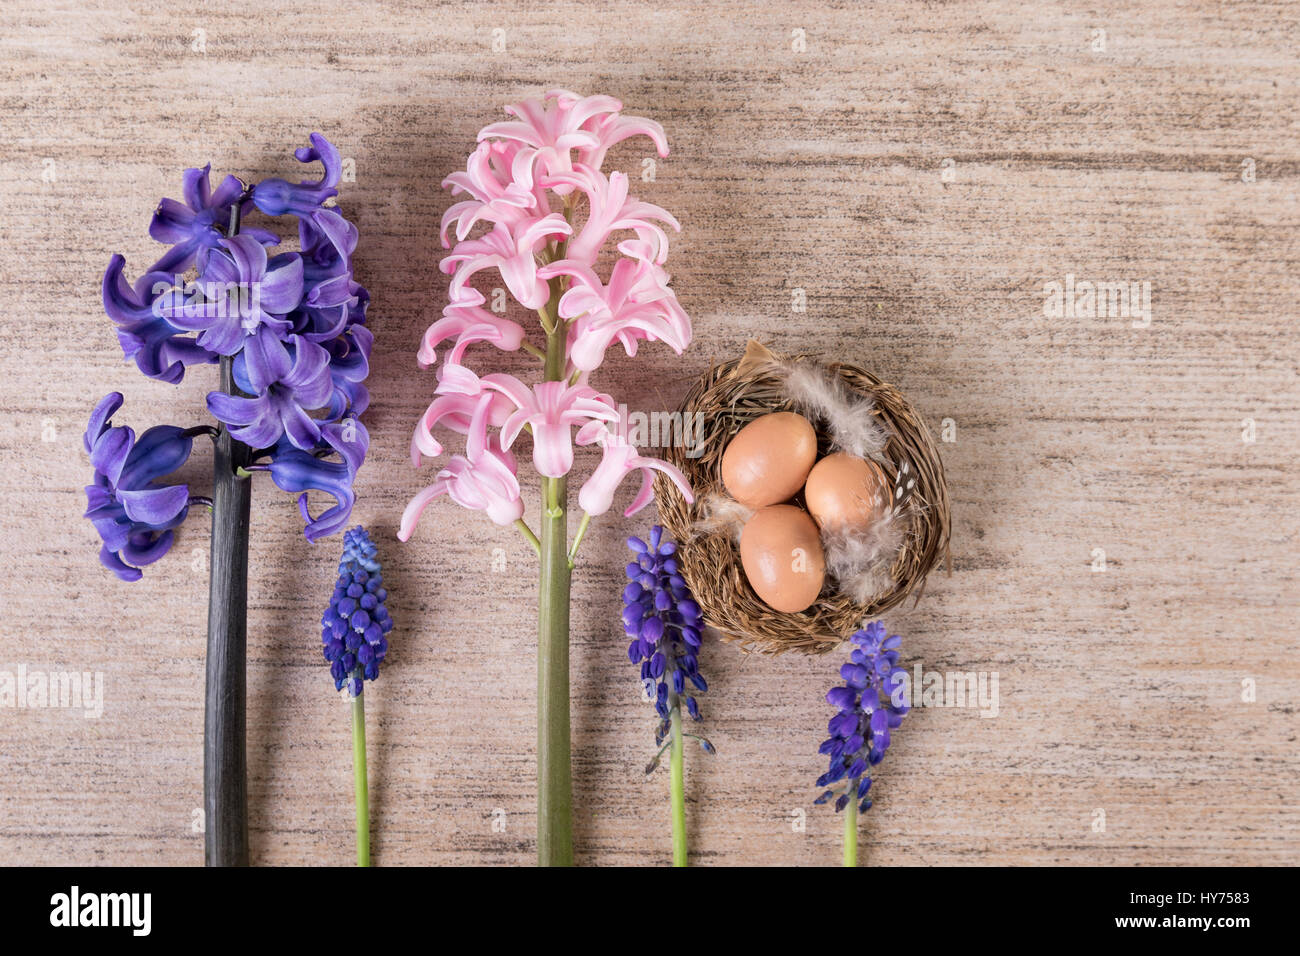 Easter rustic background with hyacinth flowers and Easter nest Stock Photo